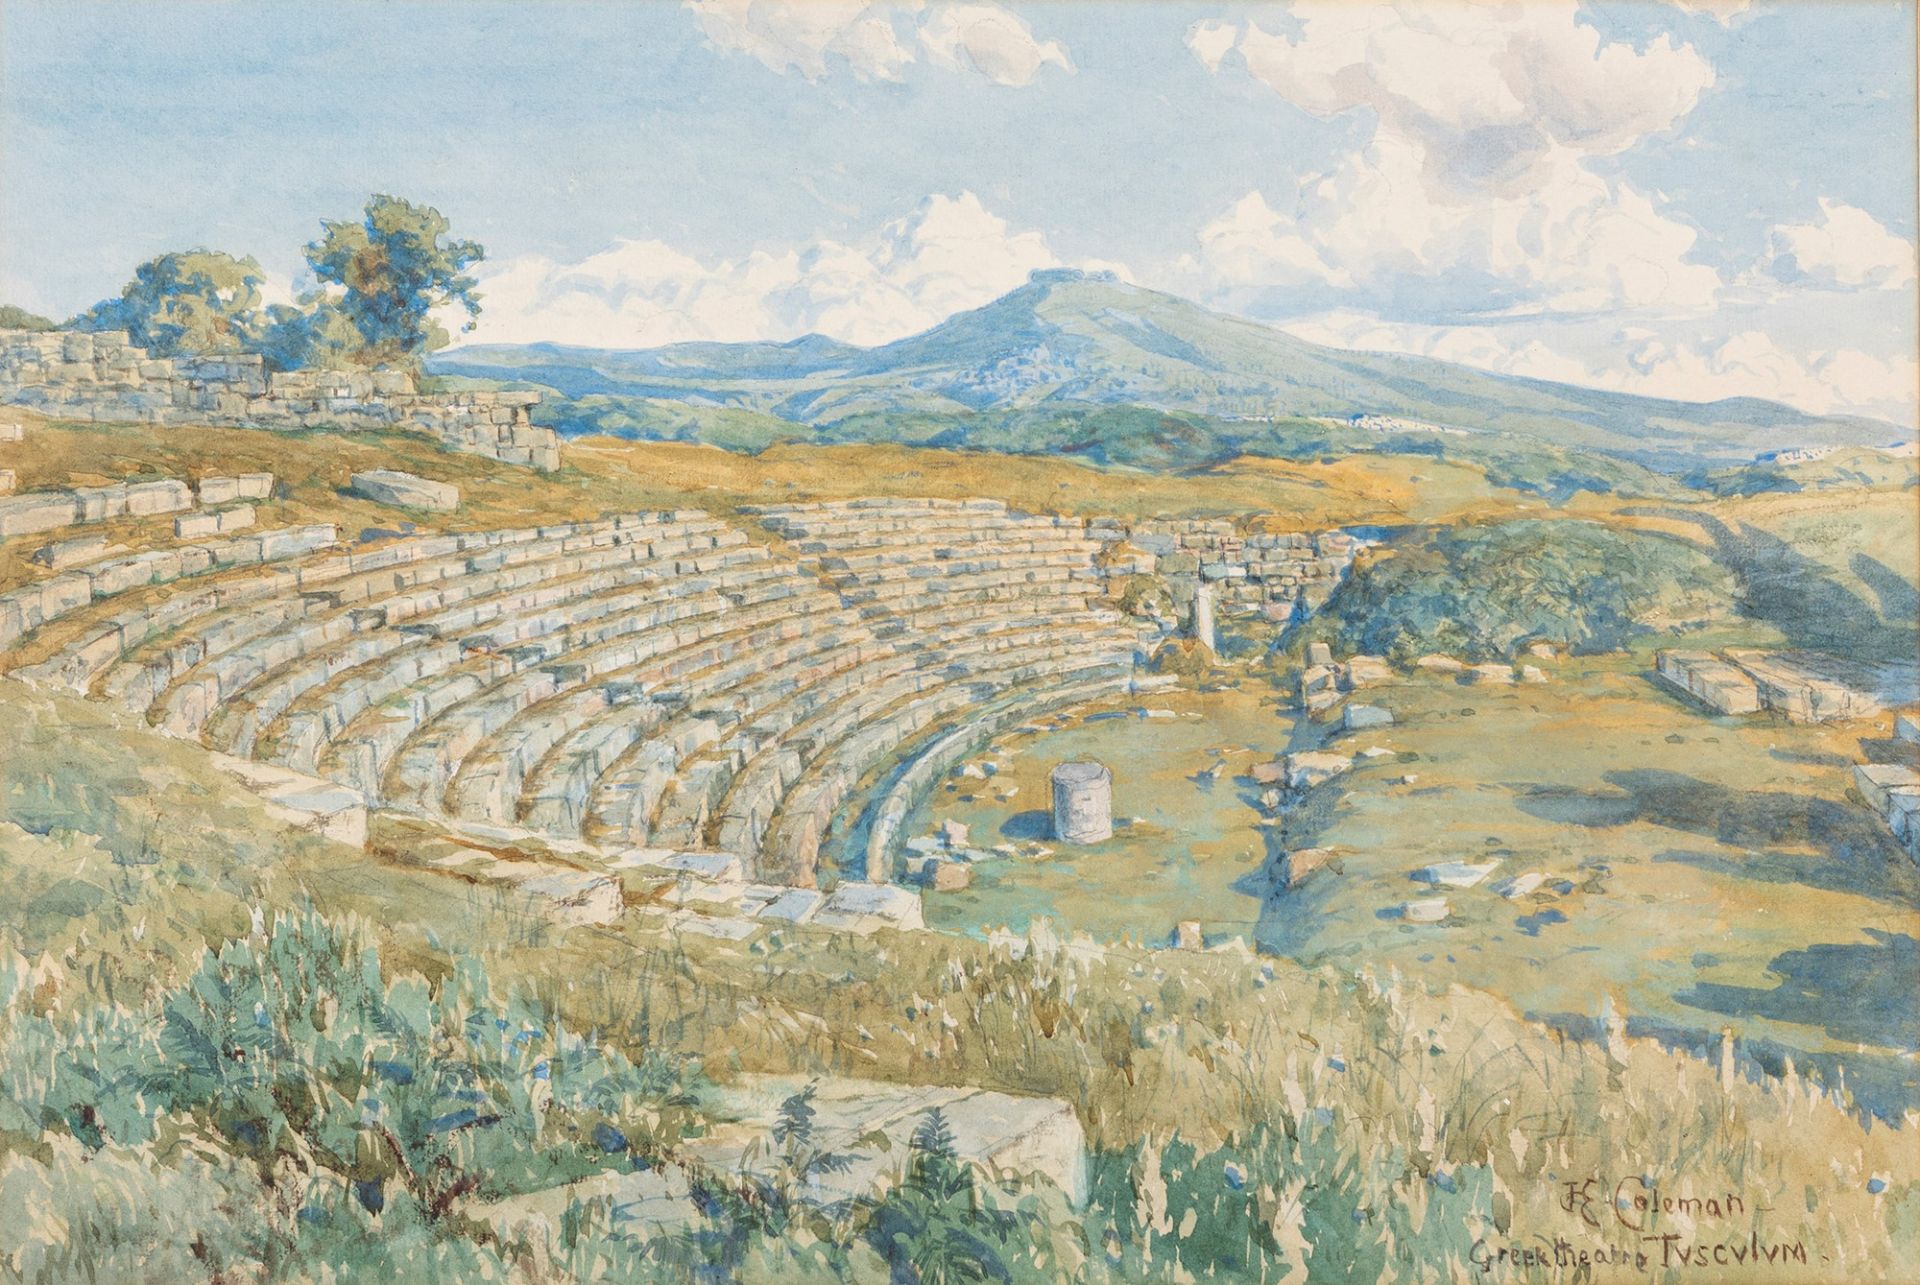 Enrico Coleman (Roma 1846-1911) - View of the Roman theater of Tusculum